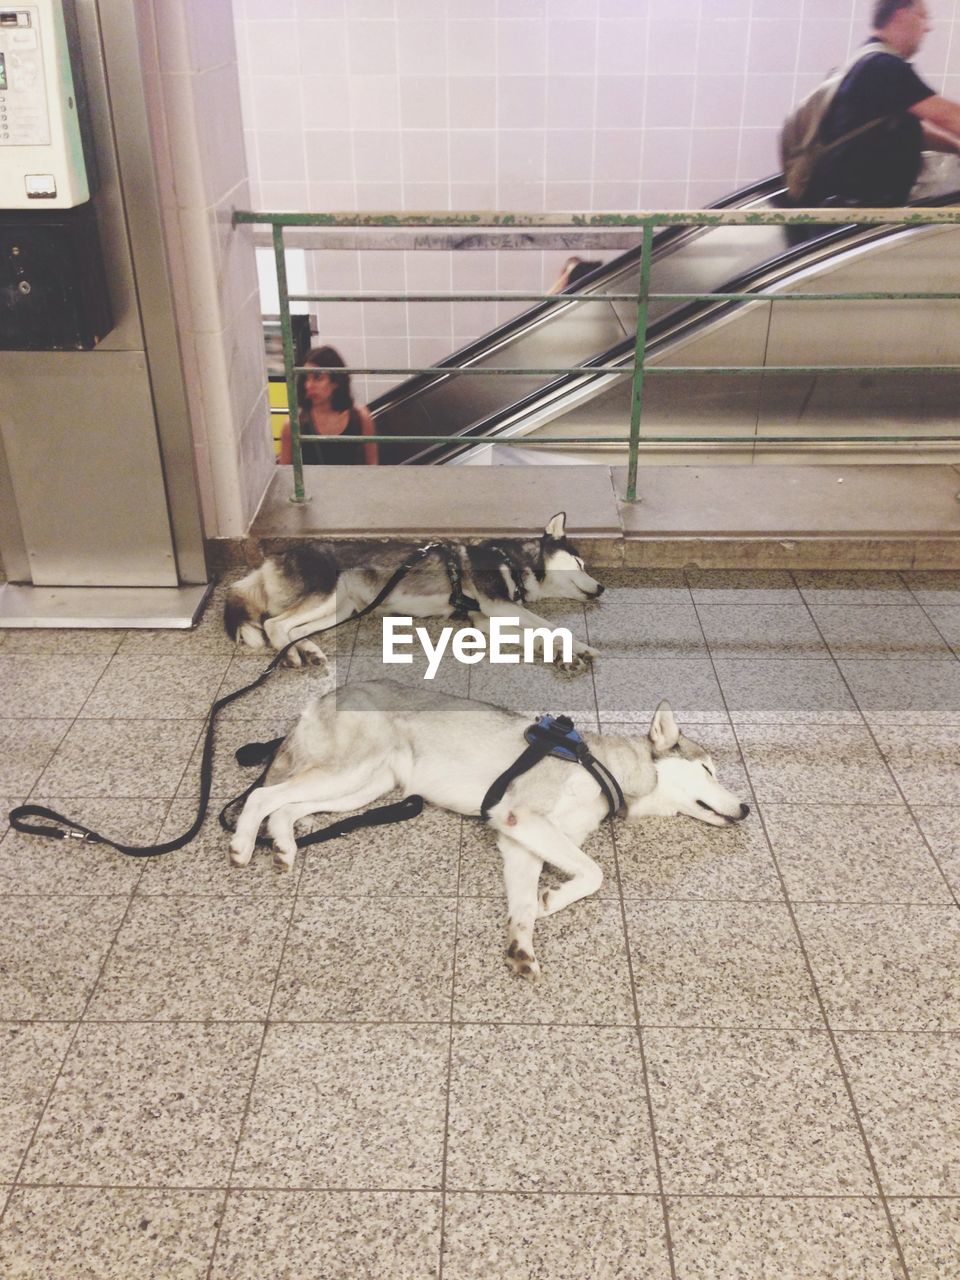 Two dogs sleeping with people on escalator in background